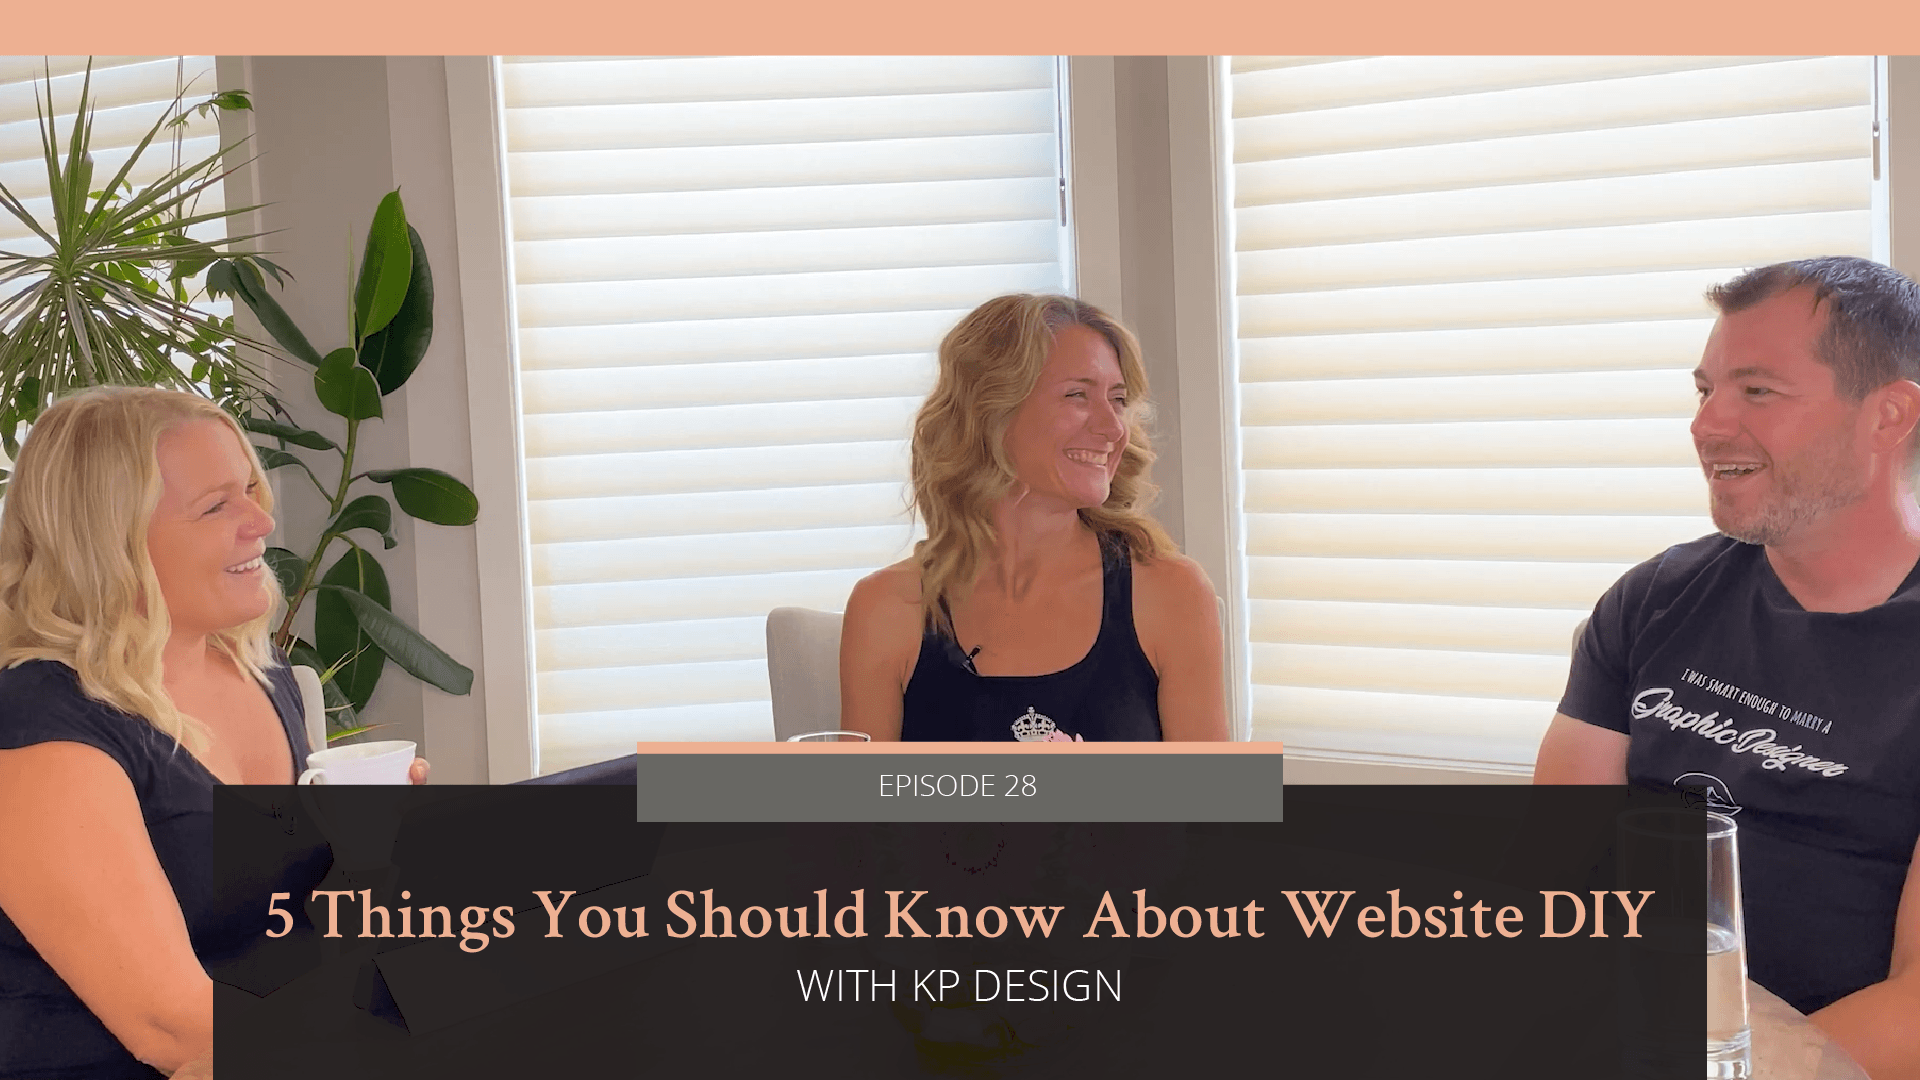 5 Things You Should Know About Website DIY